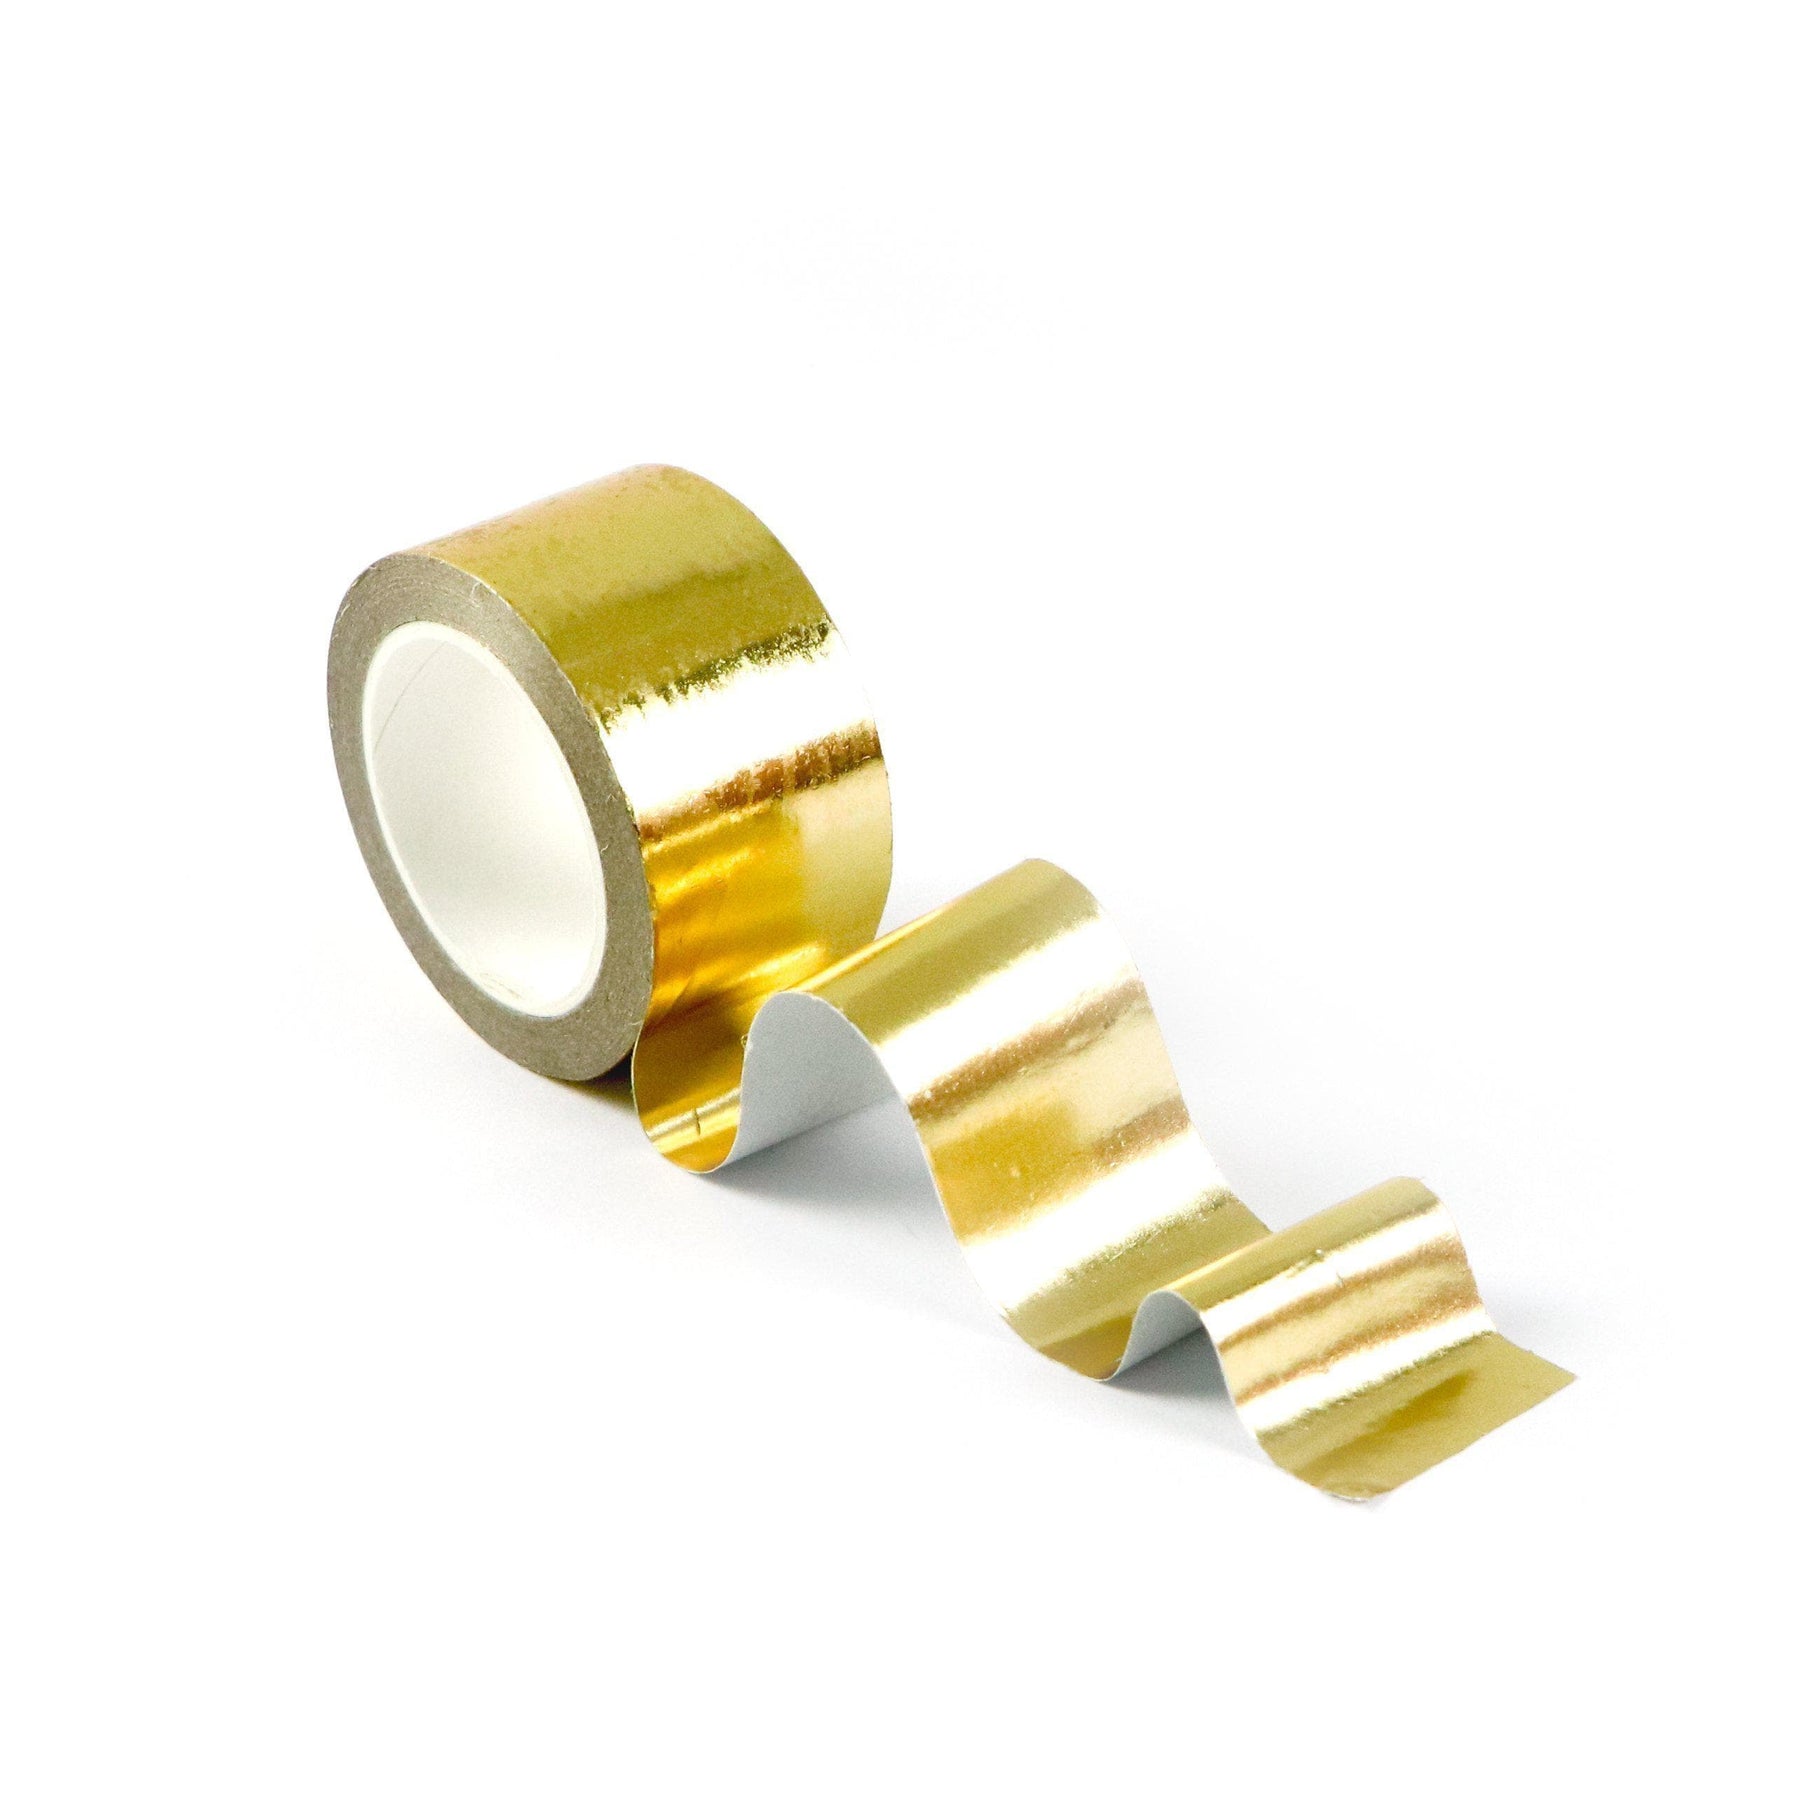 Gold Foil Tape Gold Duct Tape Gold Washi Tape Metallic Gold 9/16in